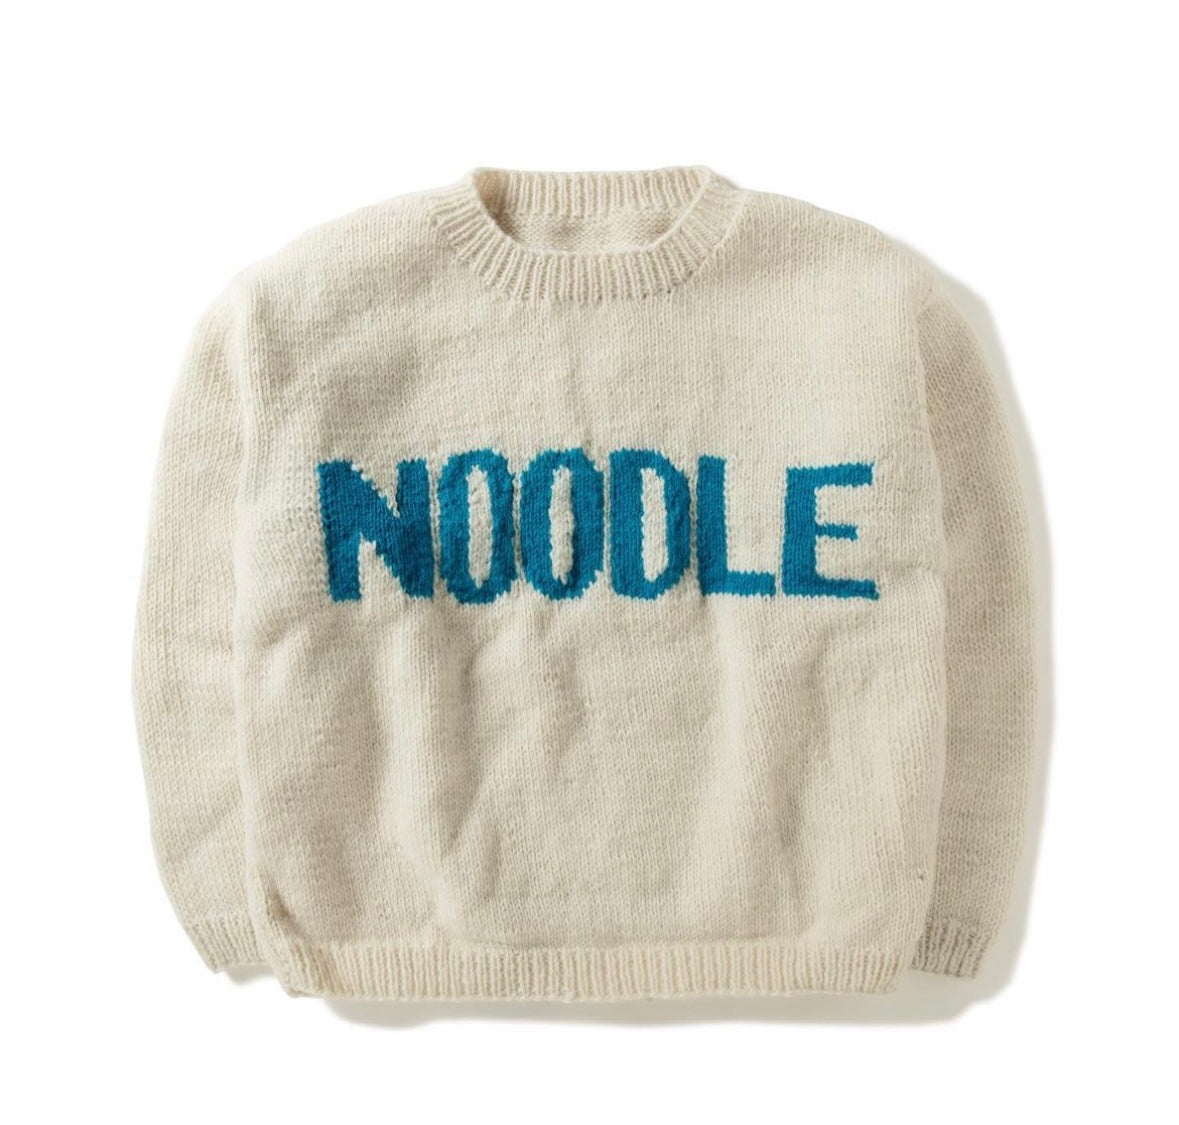 MacMahon Knitting Mills Crew Neck Knit NOODLE